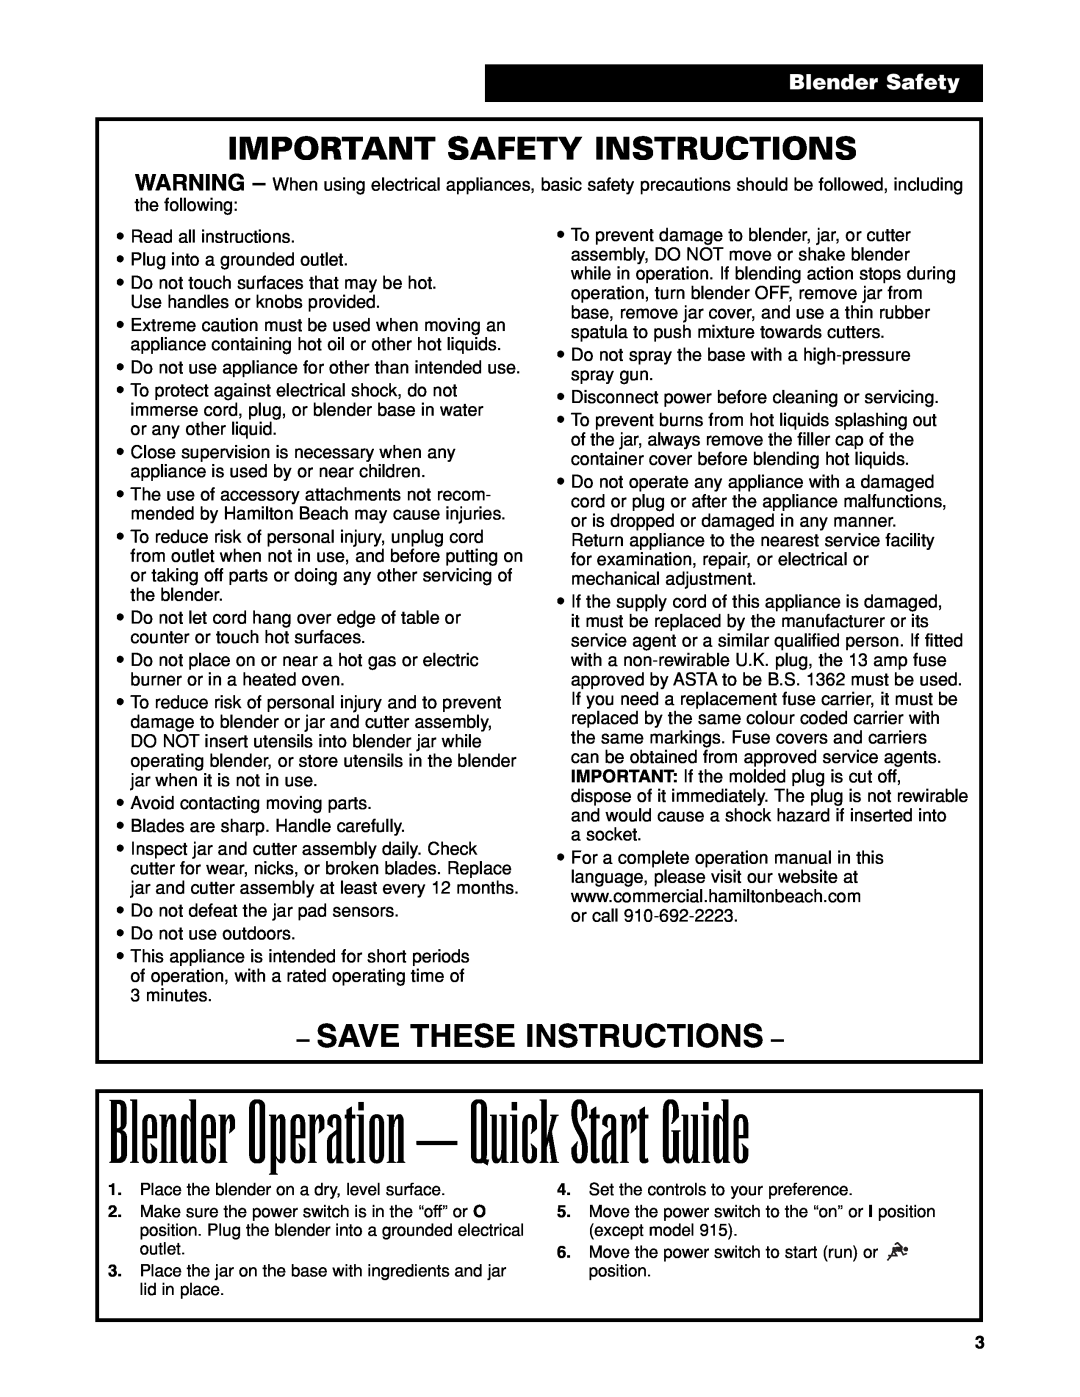 Hamilton Beach 840065601 Blender Safety, Blender Operation - Quick Start Guide, Important Safety Instructions 